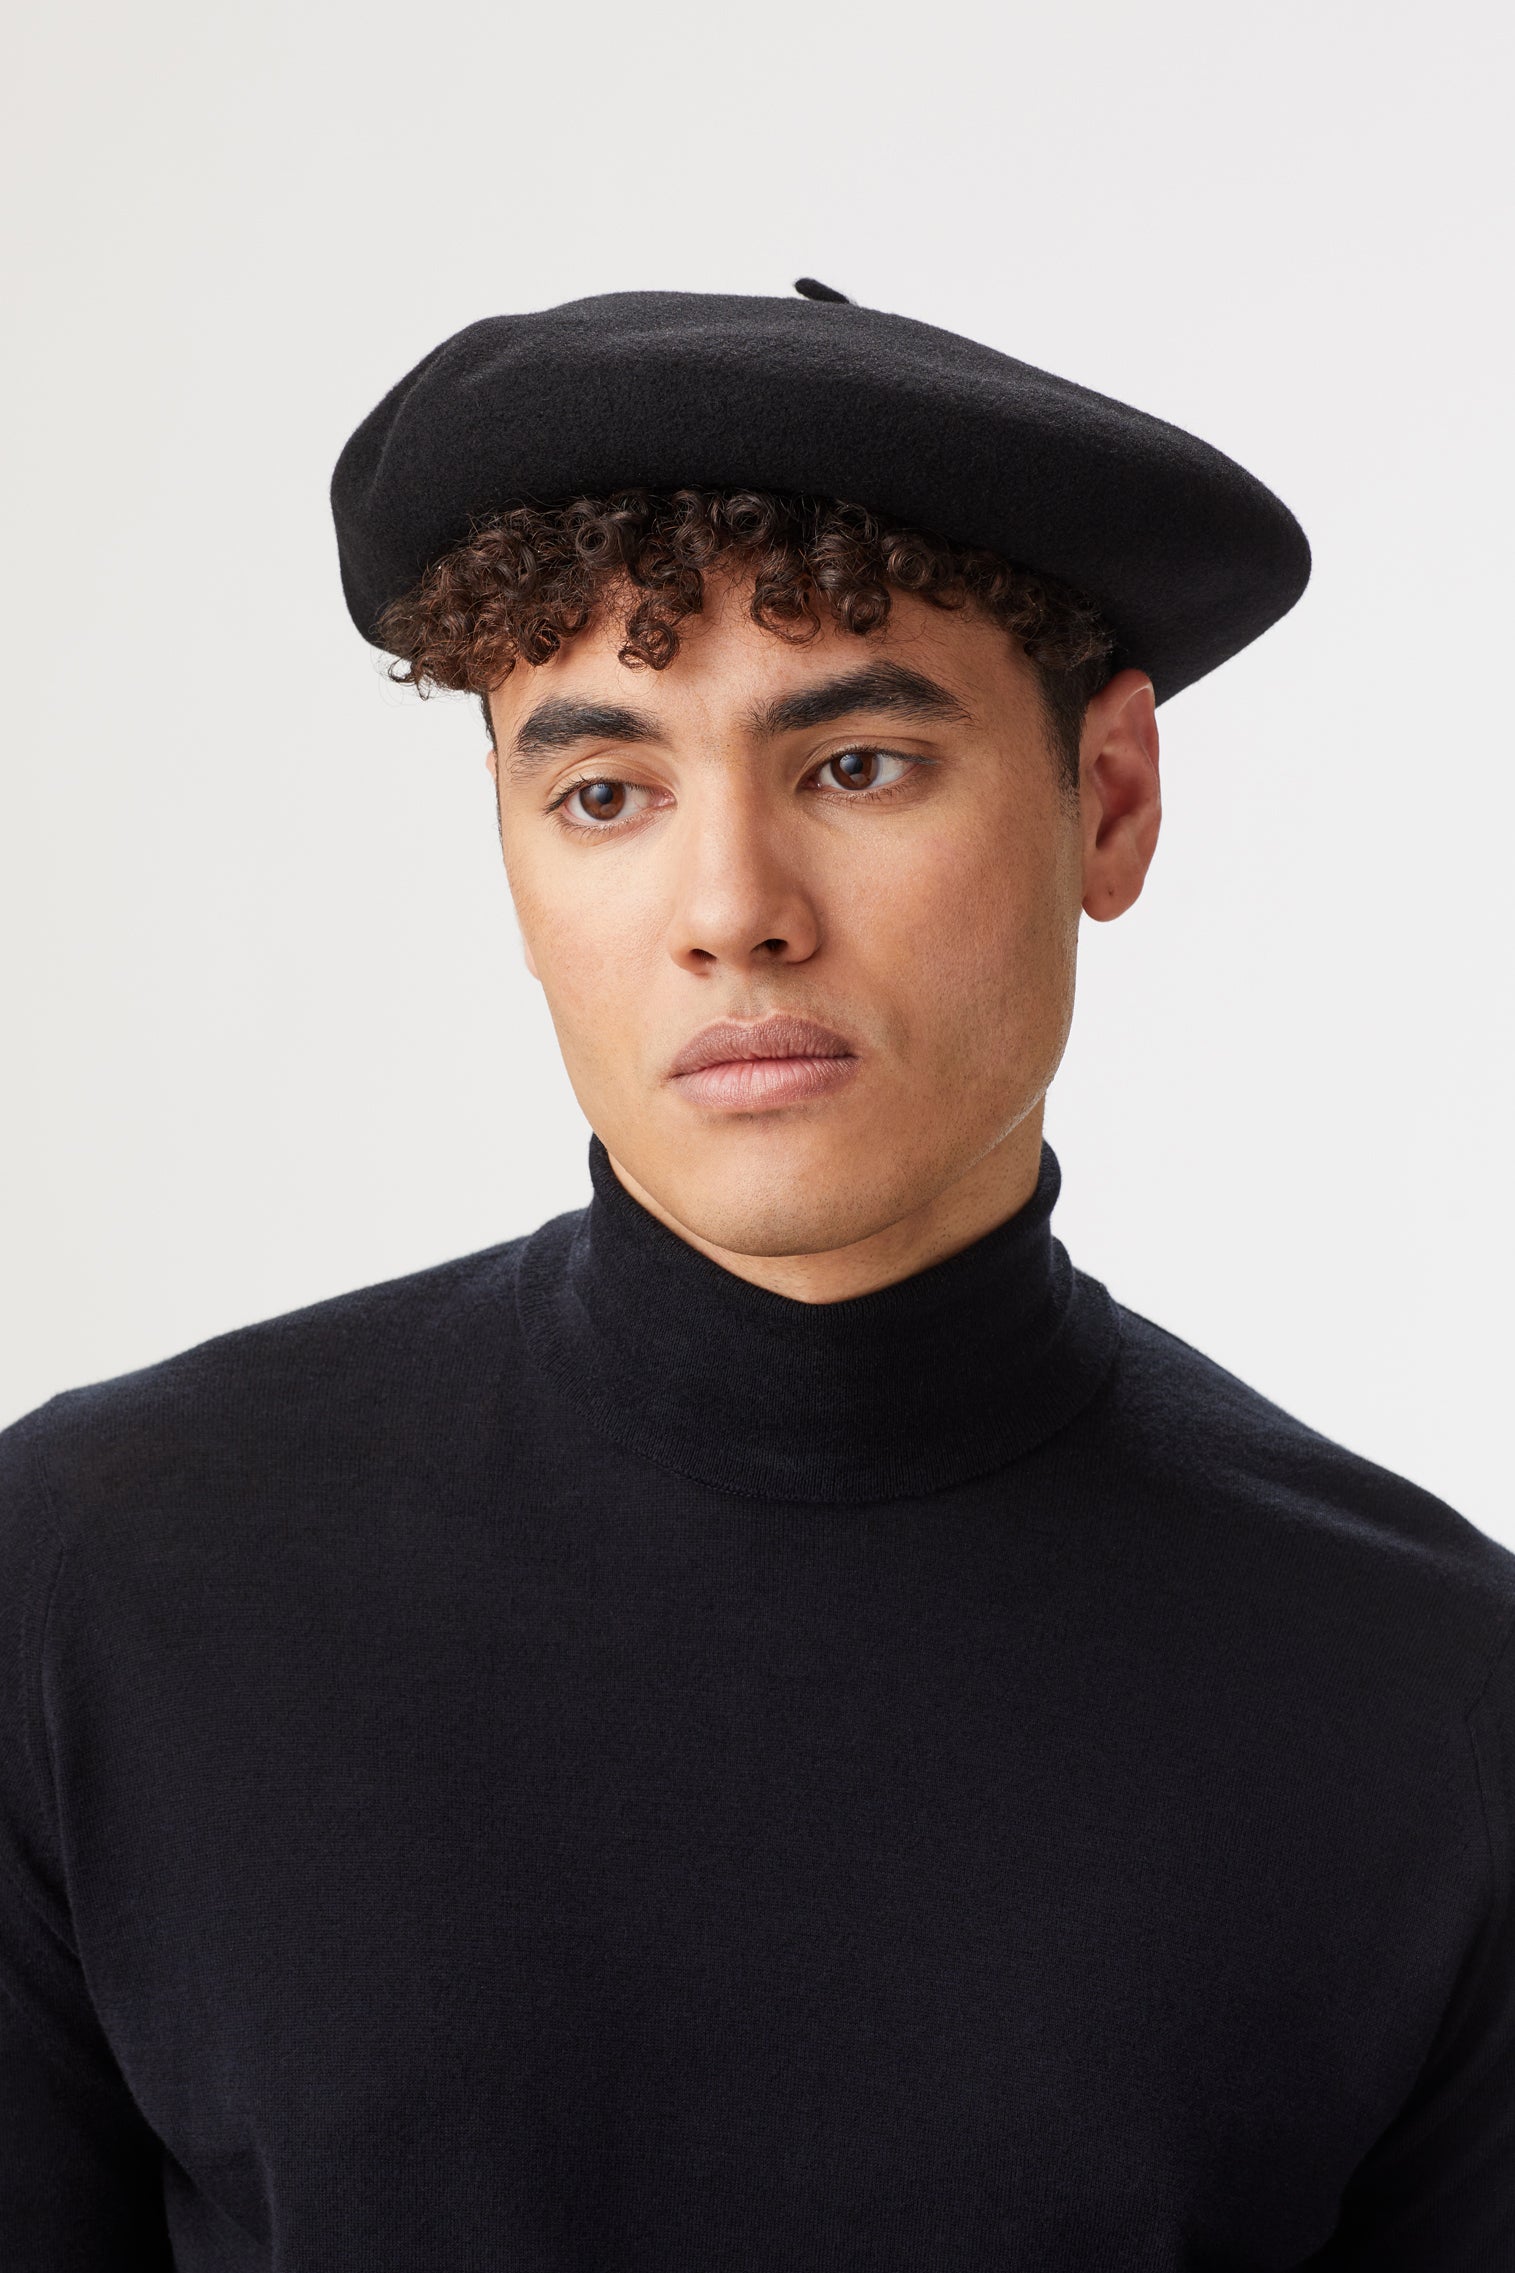 Basque Beret - Products - Lock & Co. Hatters London UK